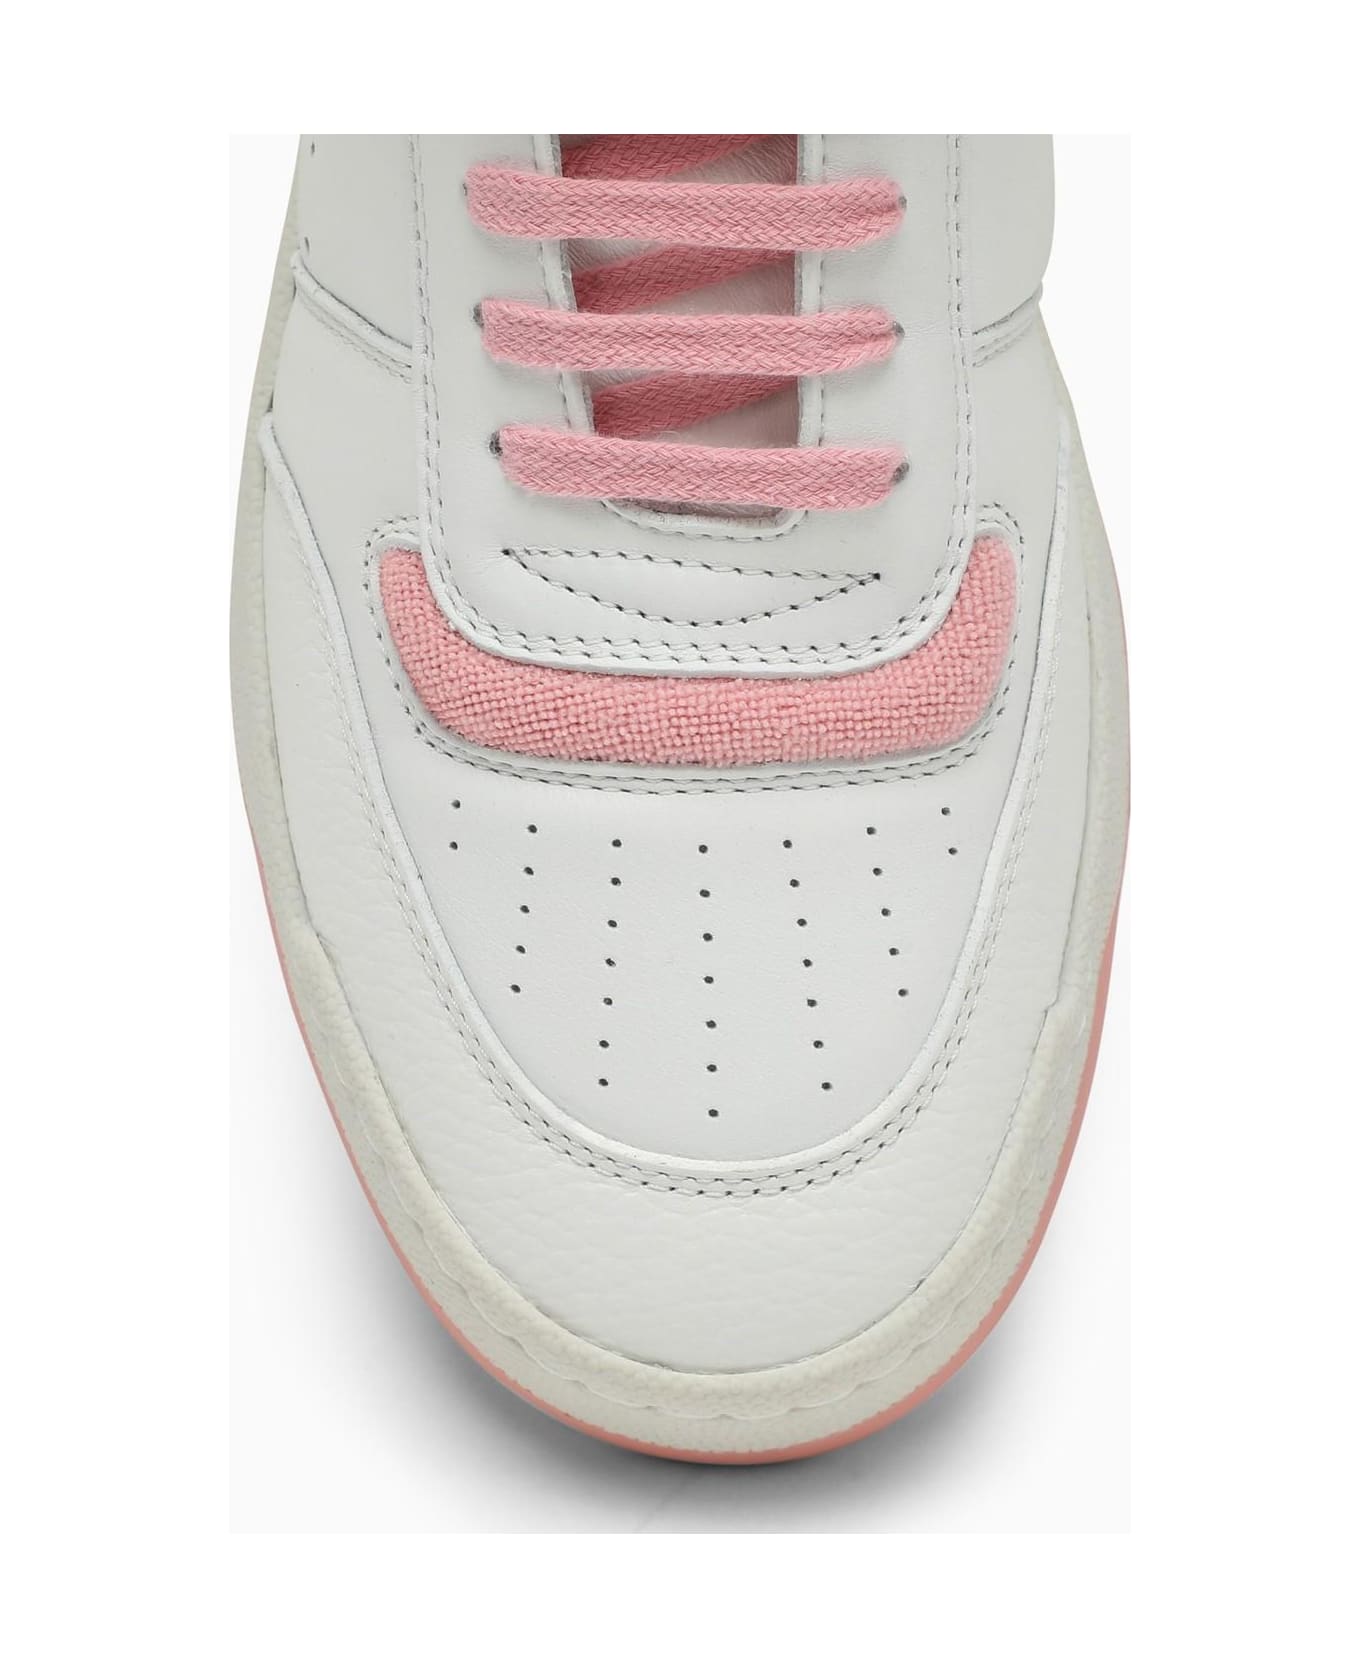 Saint Laurent Sl\/80 White\/pink Leather Sneakers - WHITE